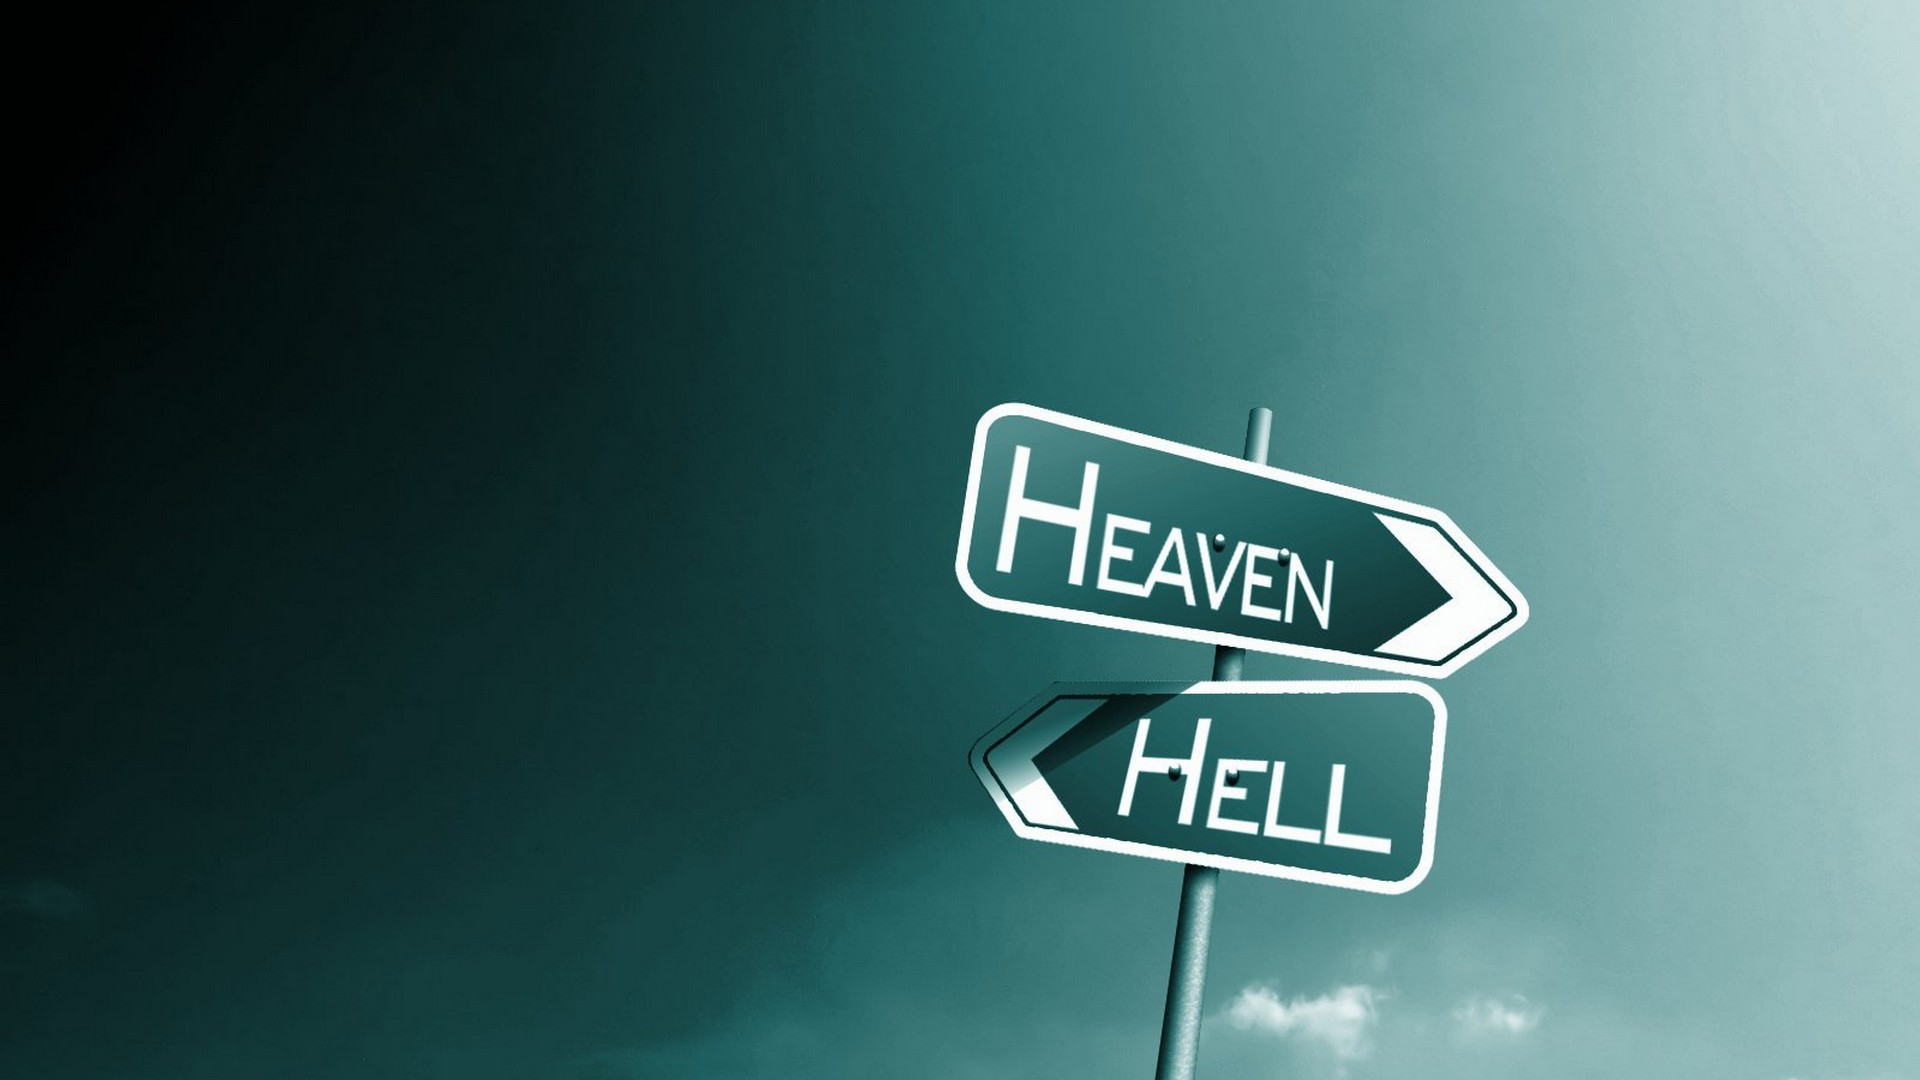 Heaven and hell sign